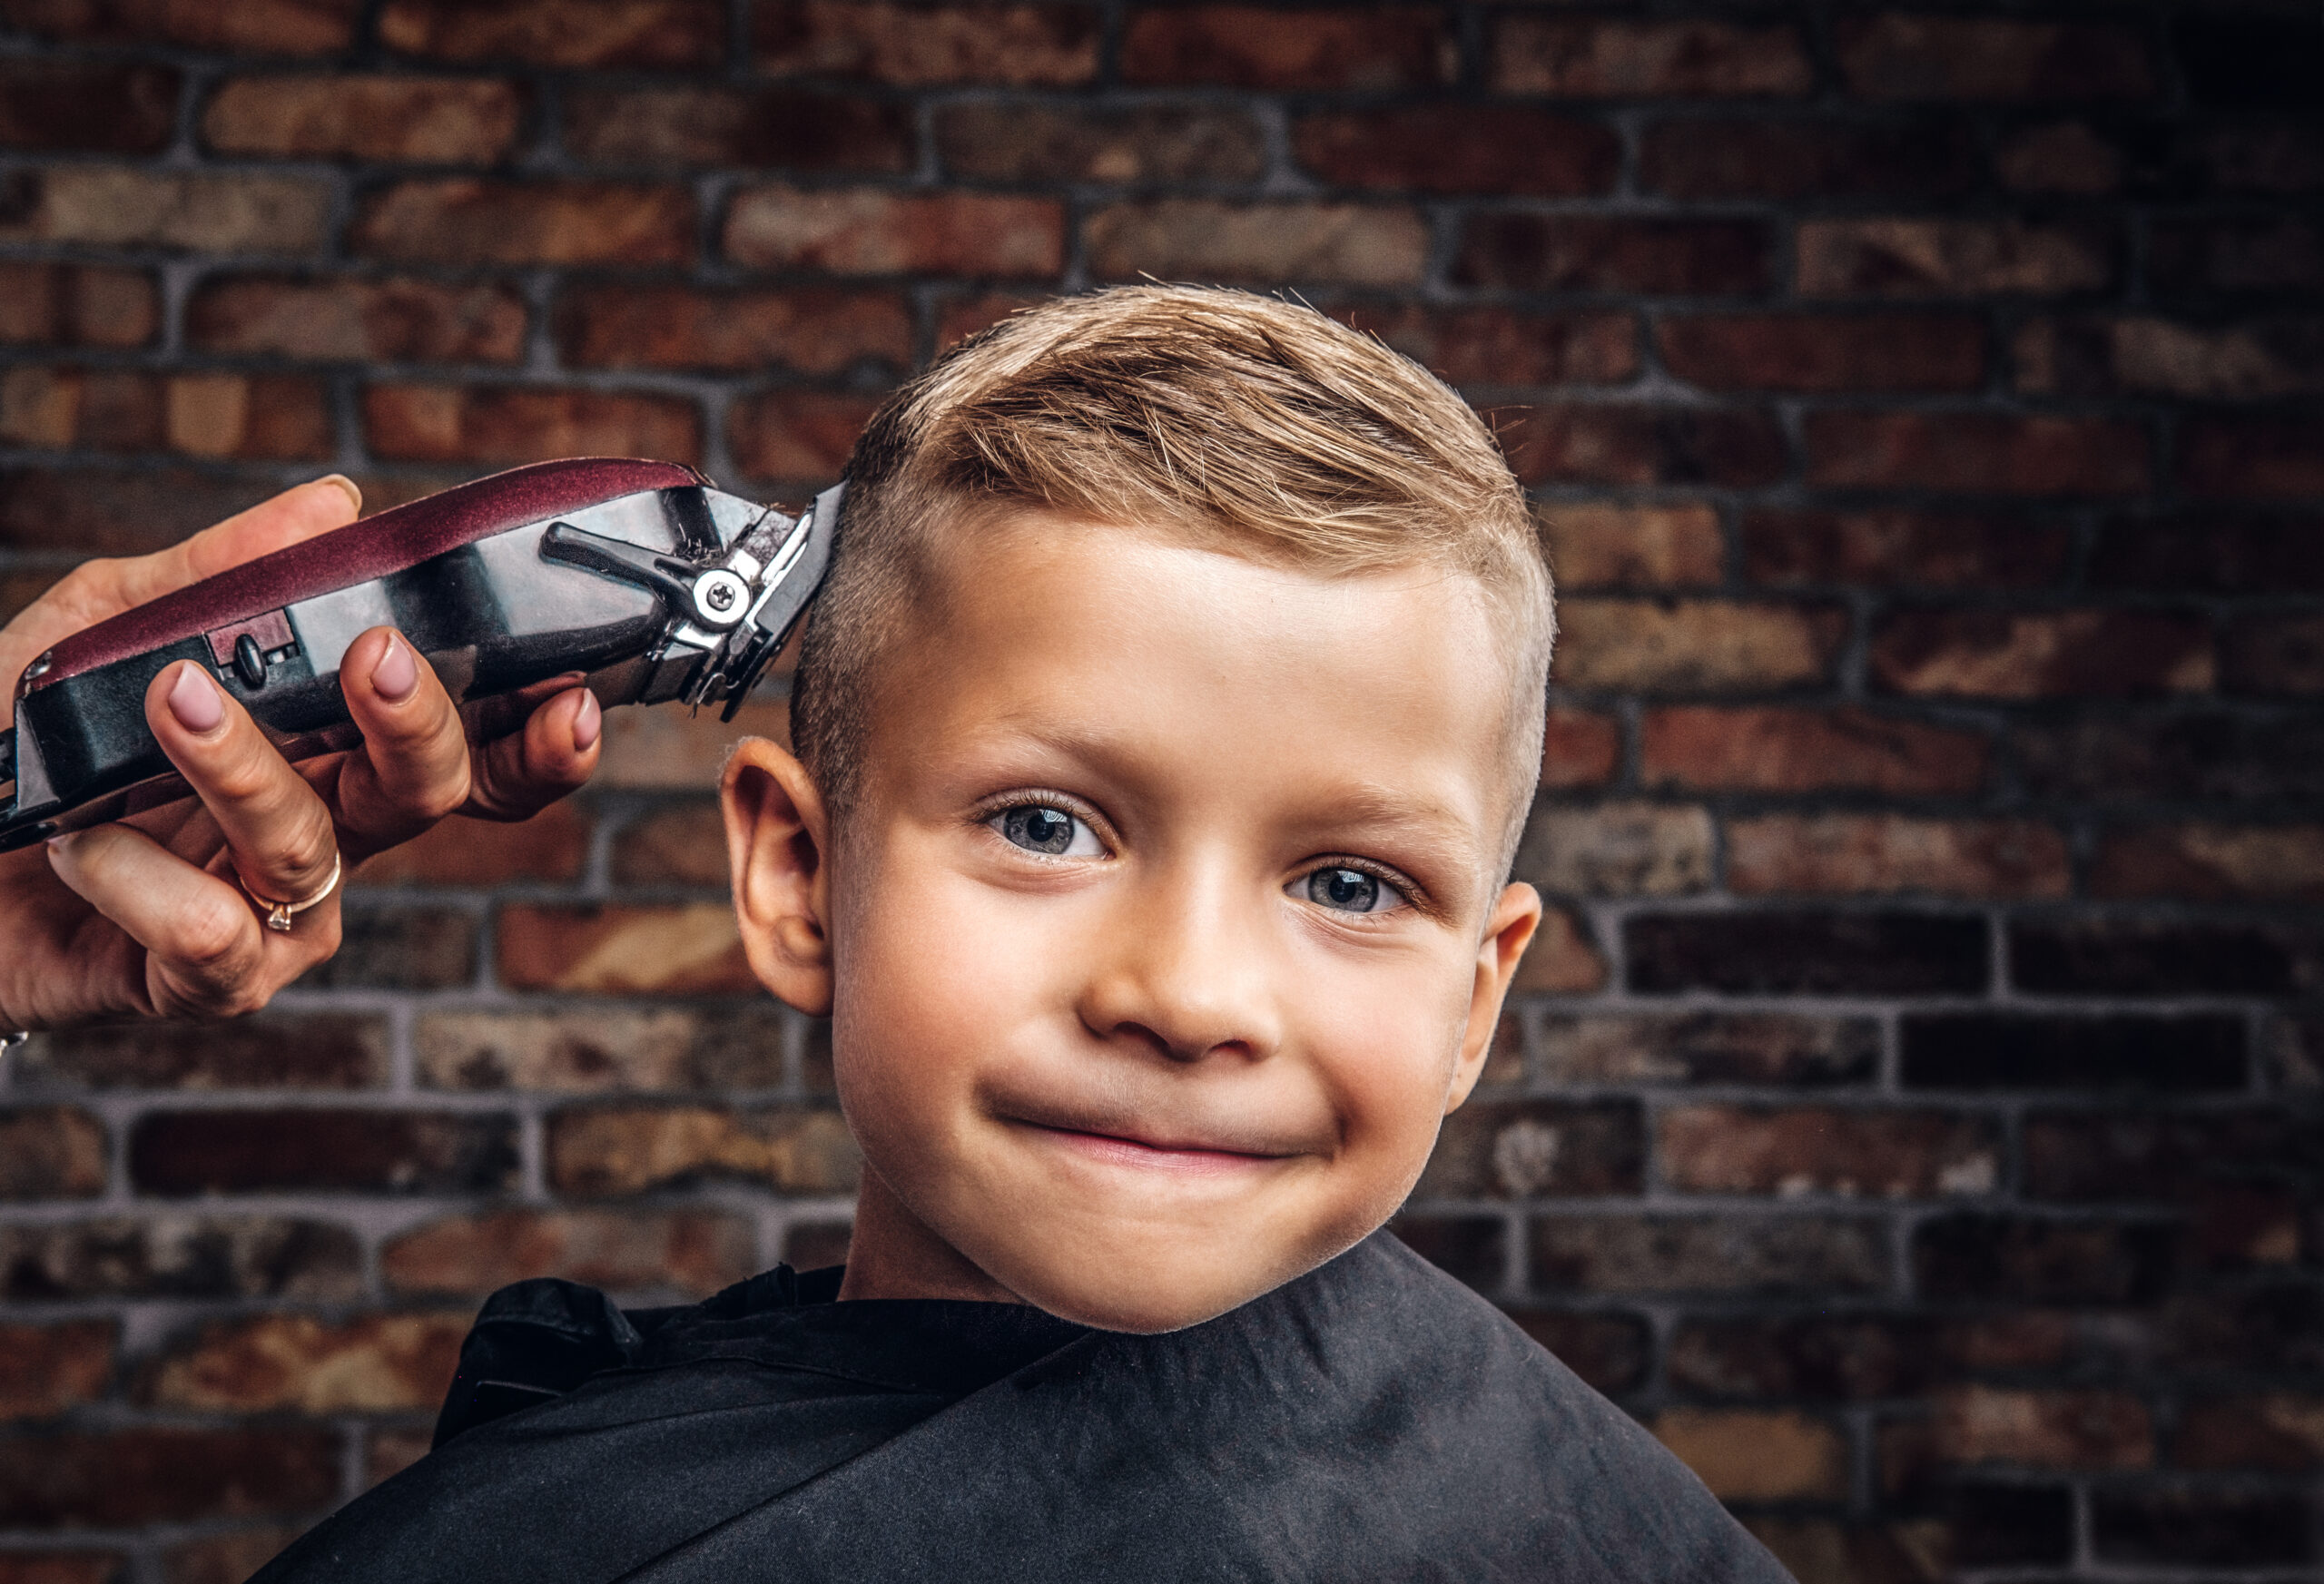 Close-up portrait of a cute smiling boy getting haircut against the brick wall.